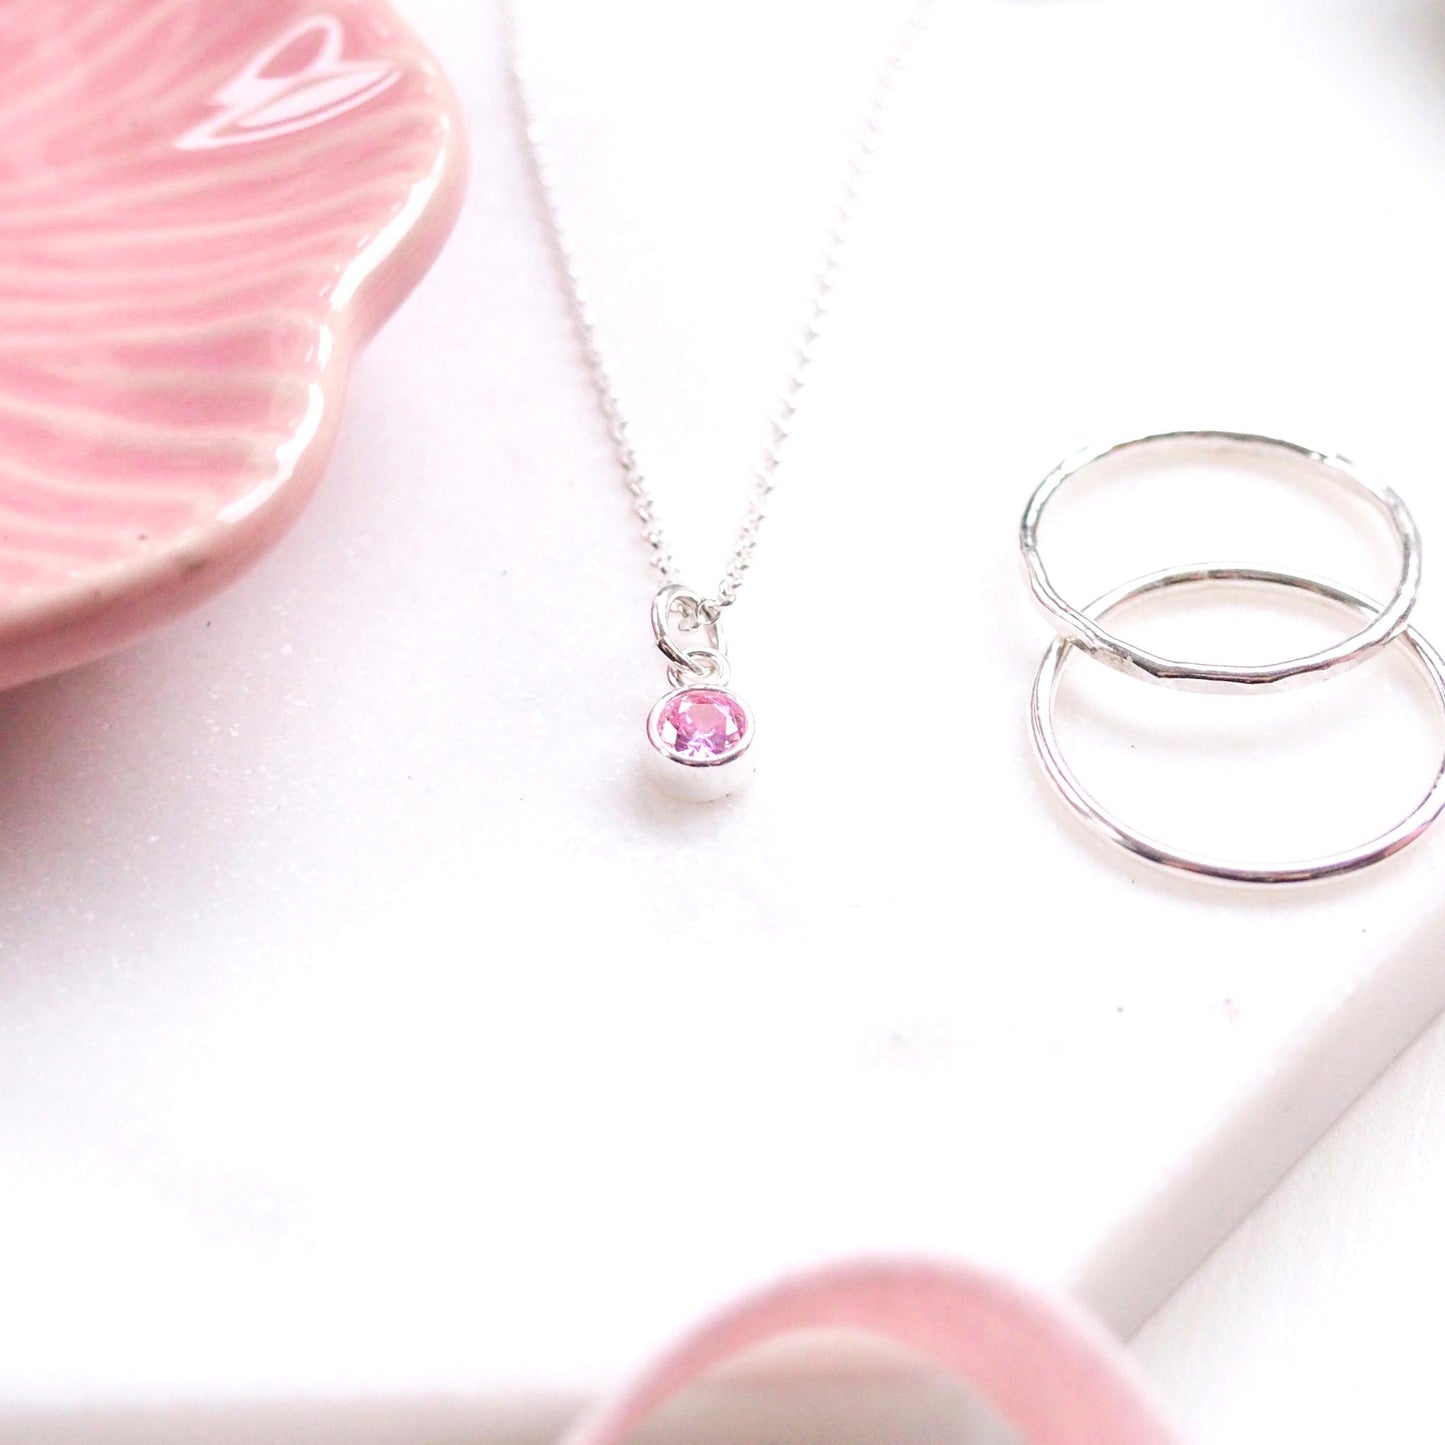 Simple Silver and Cubic Zirconia Pendant in Pale Pink, perfect for a June Birthday as it is the same colour as Alexandrite. The Sterling Silver Pendant in pictured on a white marble background with a pale pink jewellery dish with silver rings. Handcrafted in Scotland by maram jewellery